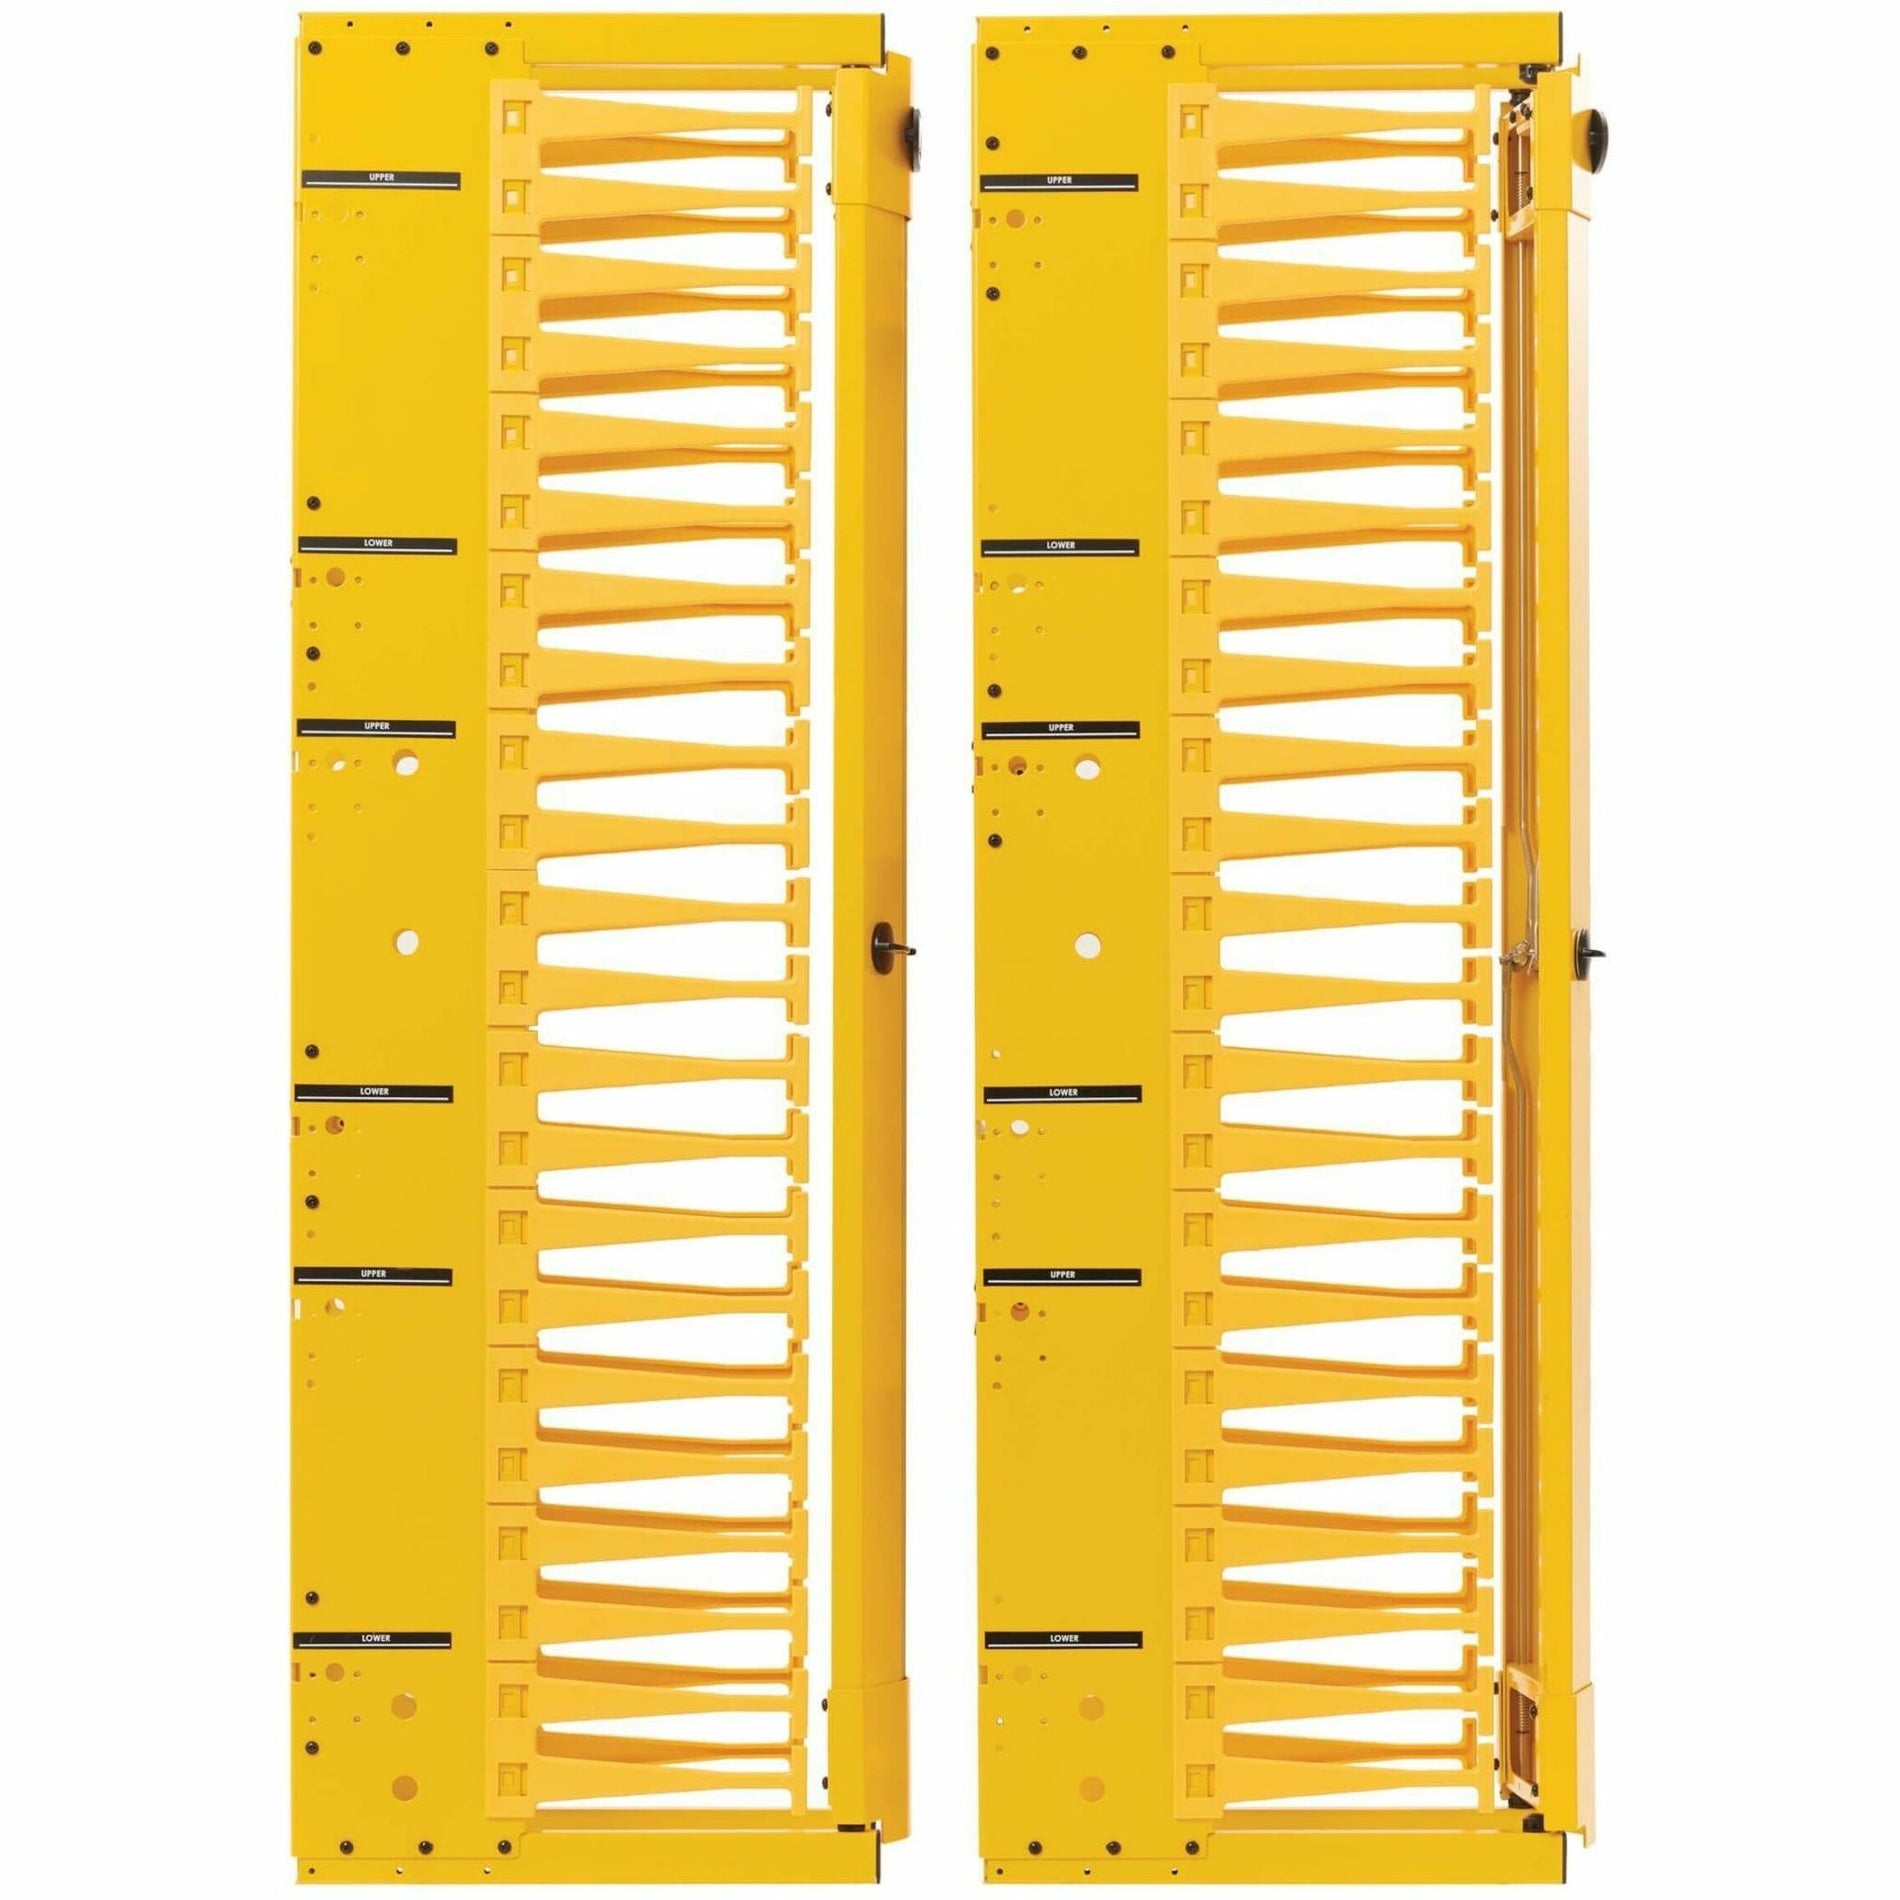 Tripp Lite SRCABLEVRT6HDFC Cable Organizer - Finger Duct, Yellow - Manage Cables Easily and Efficiently